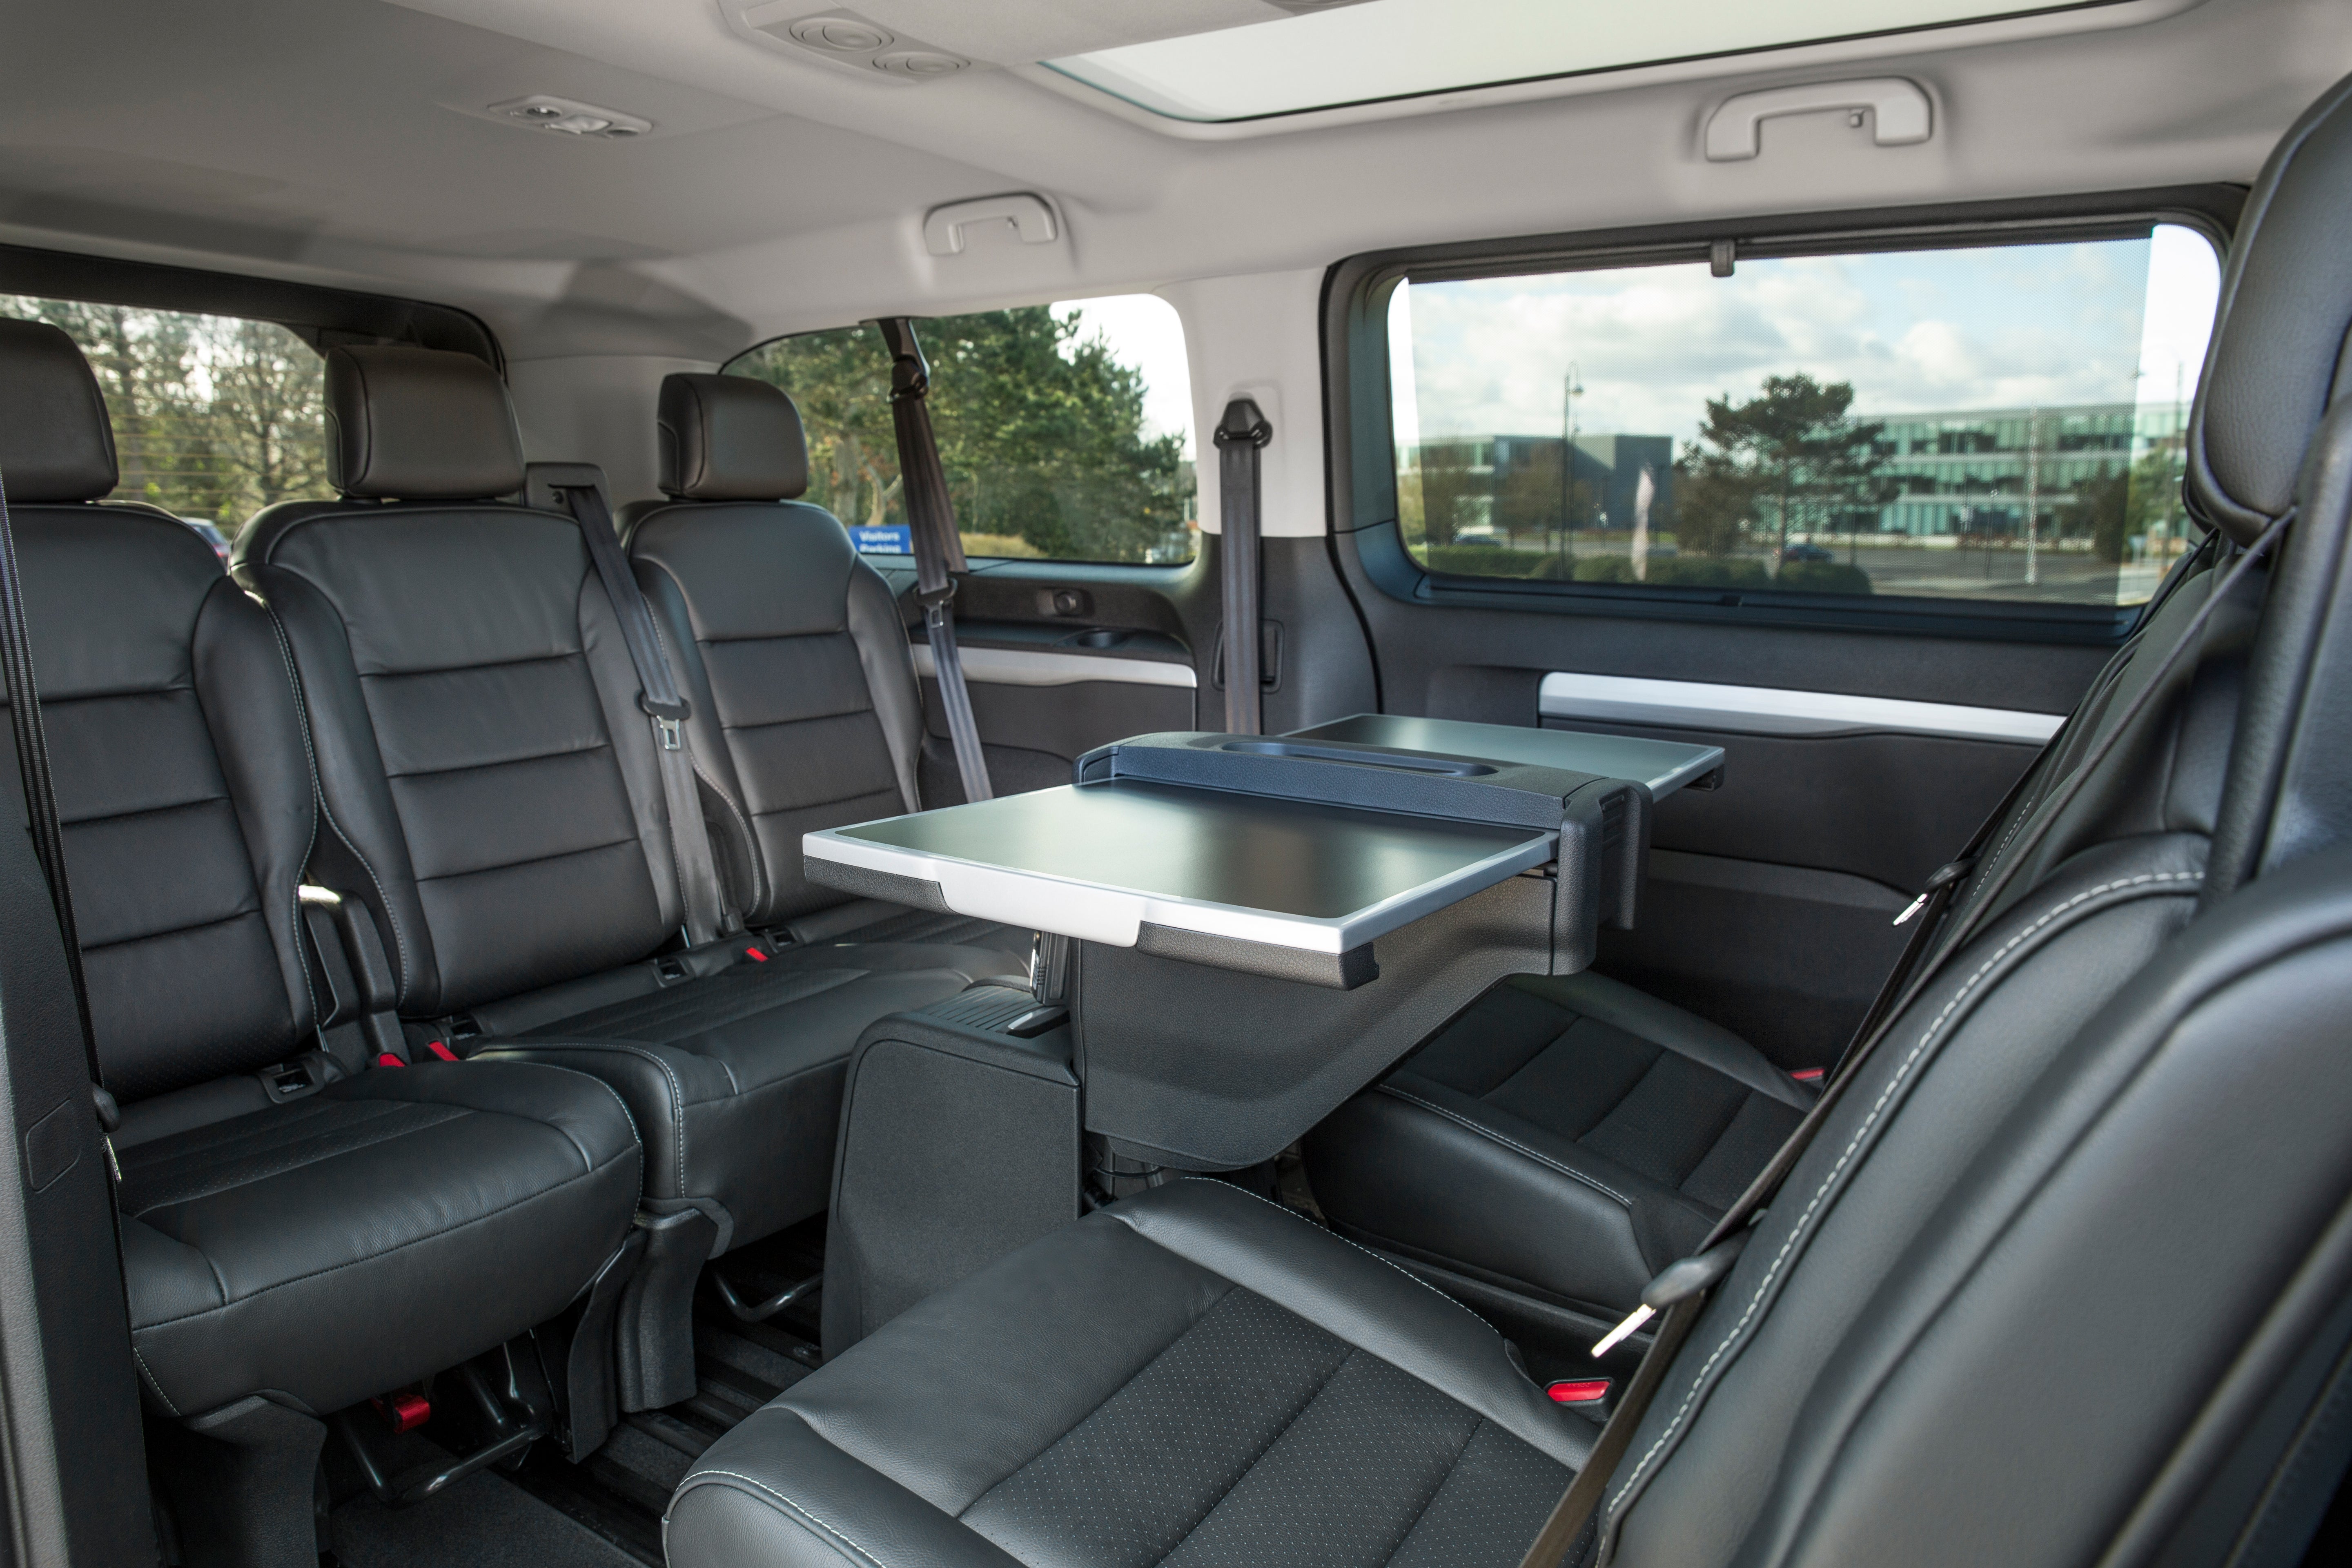 Toyota Proace Verso Review 2022: Back Car Seats